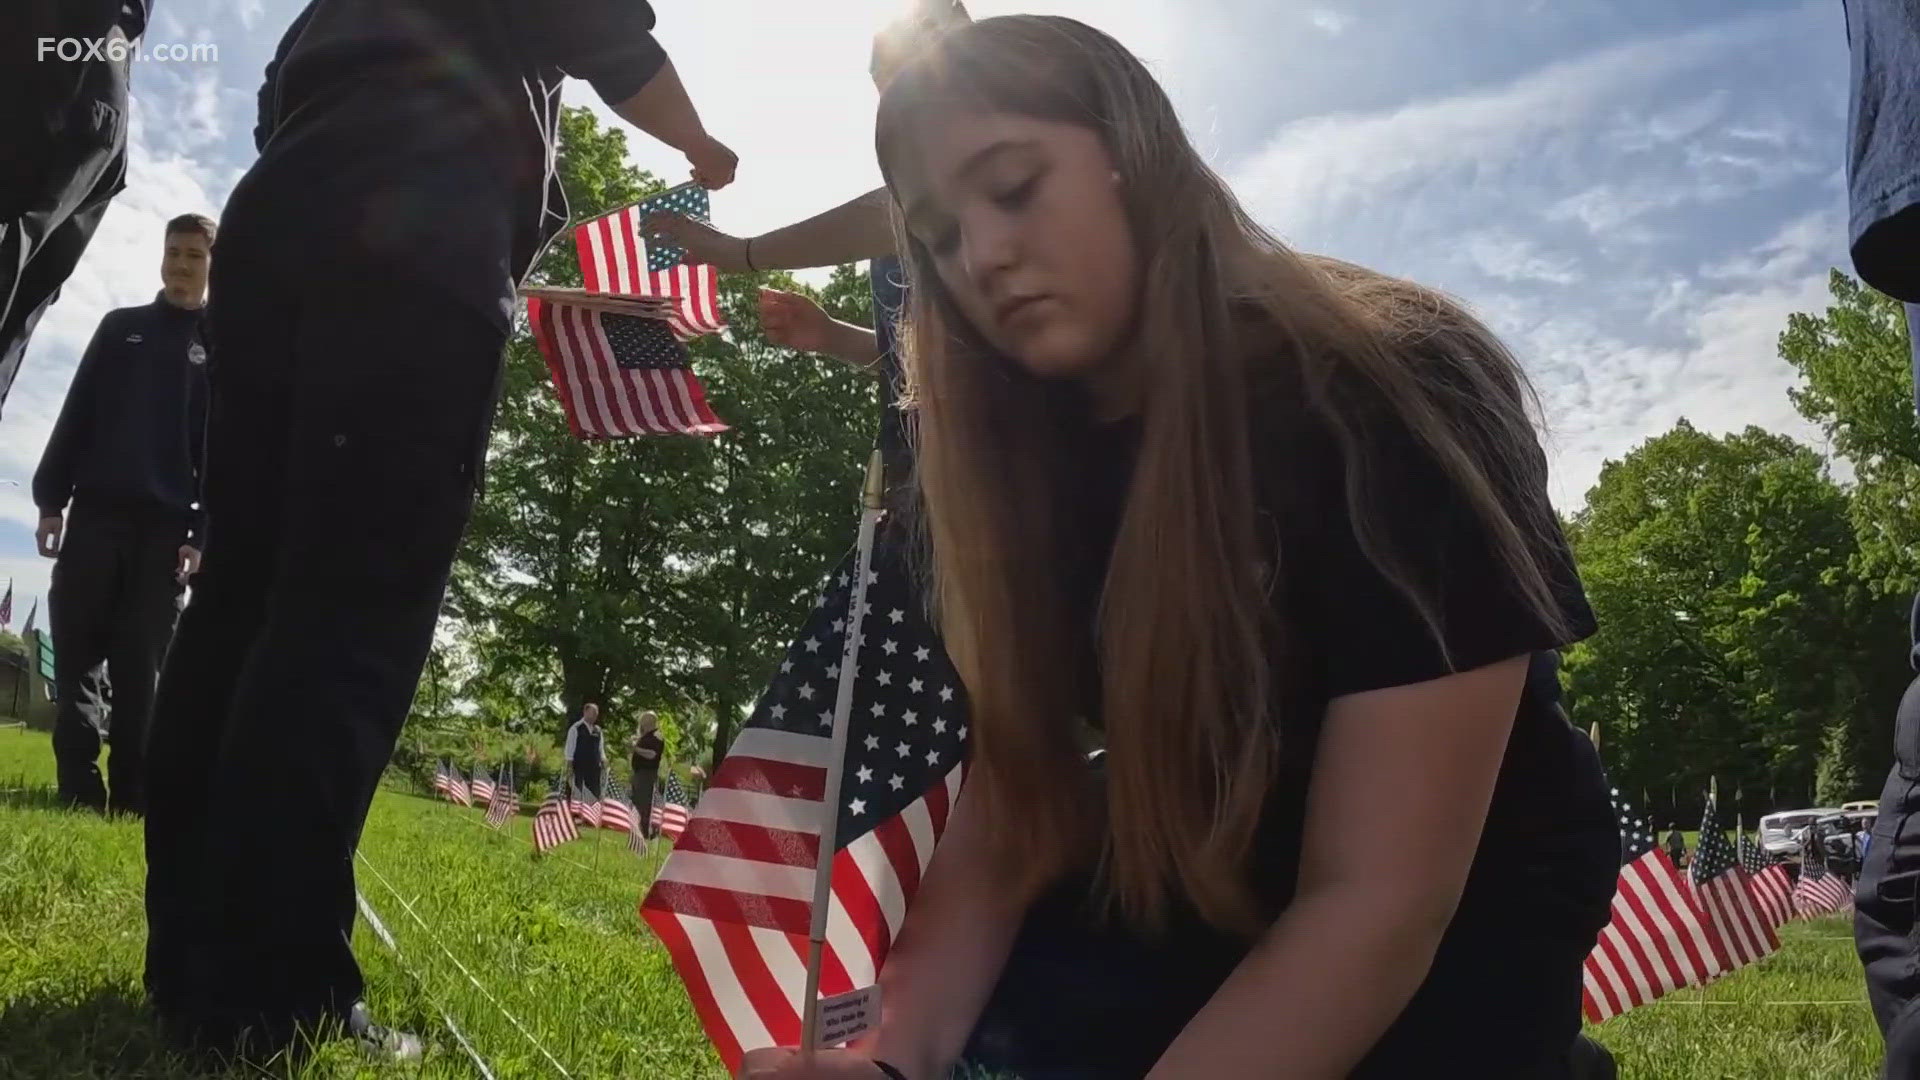 The Iwo Jima Memorial Historical Foundation in New Britain has installed the Field of Flags and is looking for the public's help to raise awareness and funds.